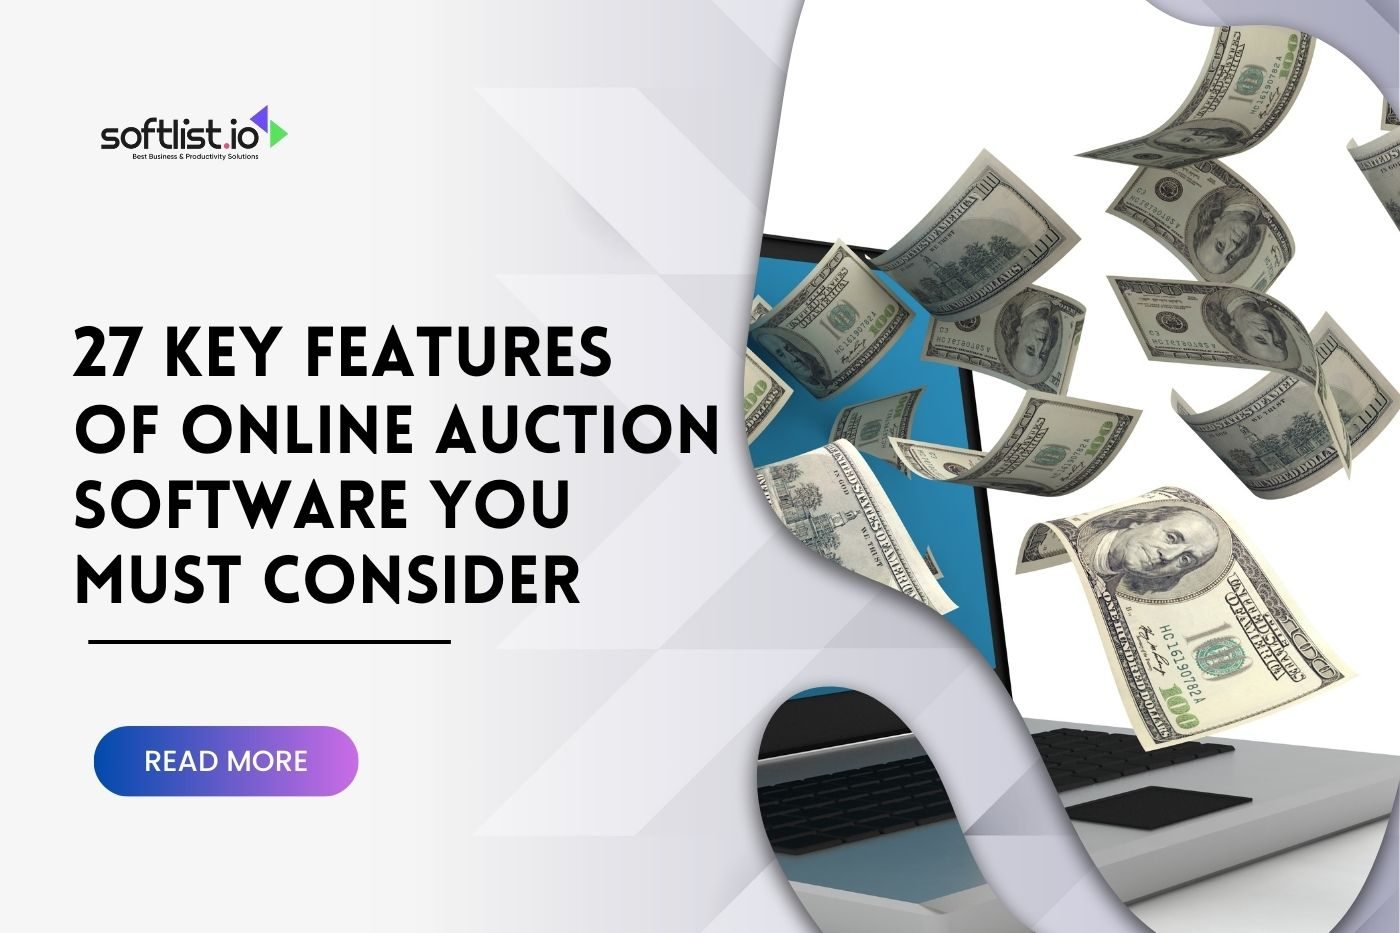 27 Key Features of Online Auction Software You Must Consider